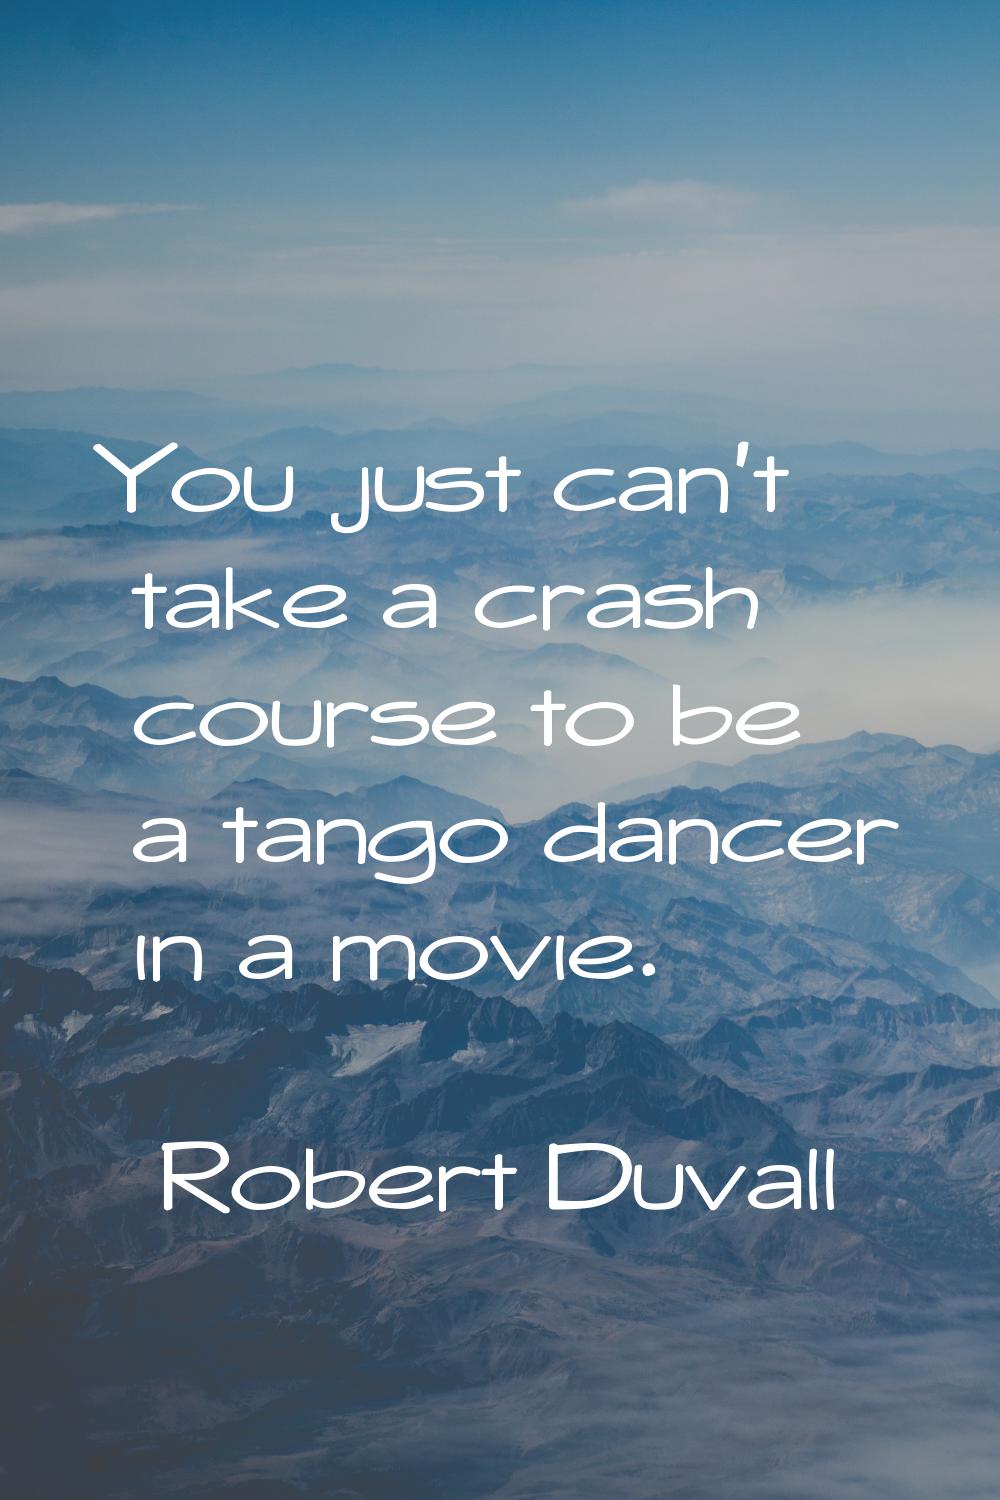 You just can't take a crash course to be a tango dancer in a movie.